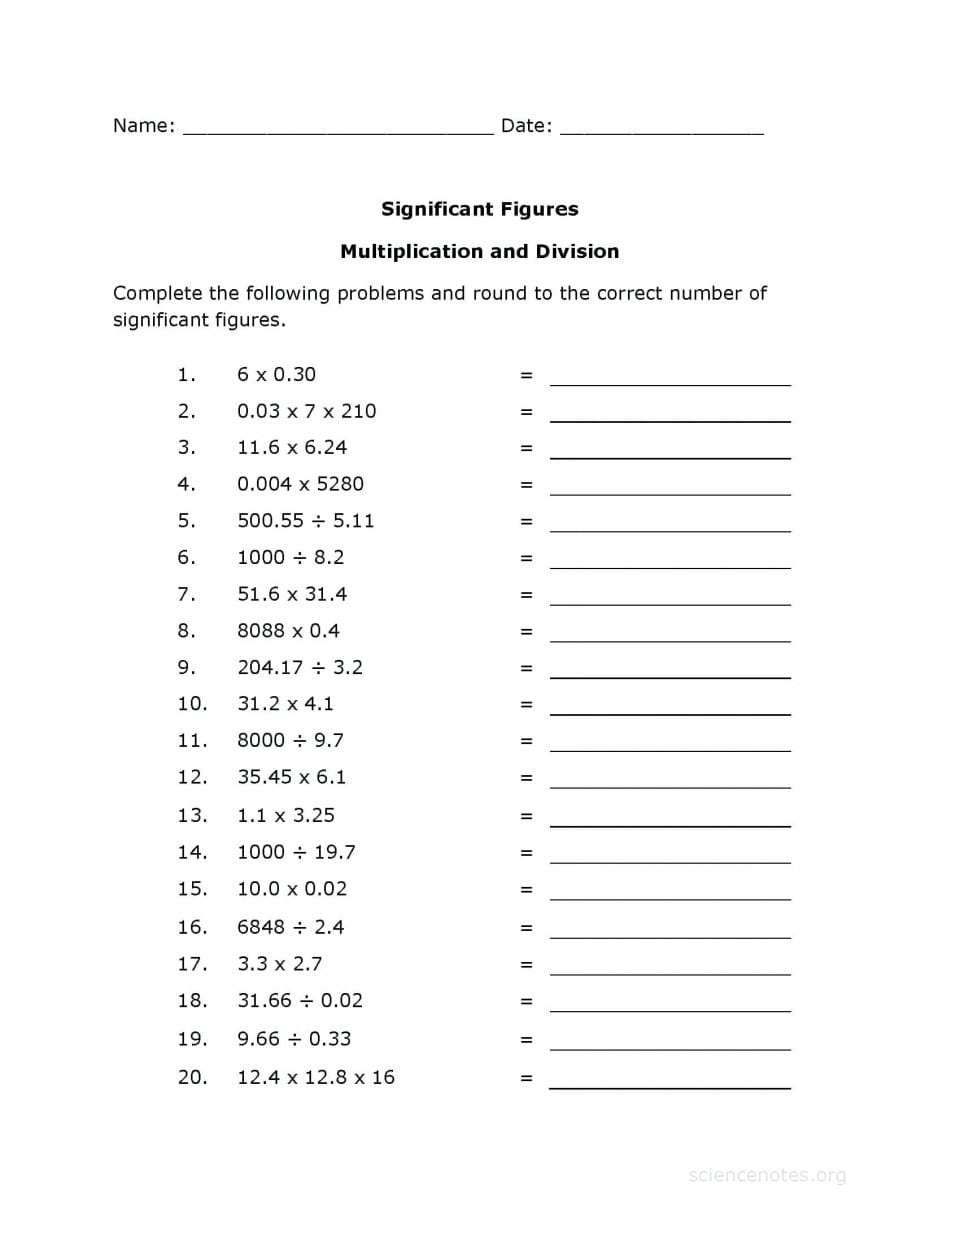 properties-of-addition-worksheets-pdf-db-excel